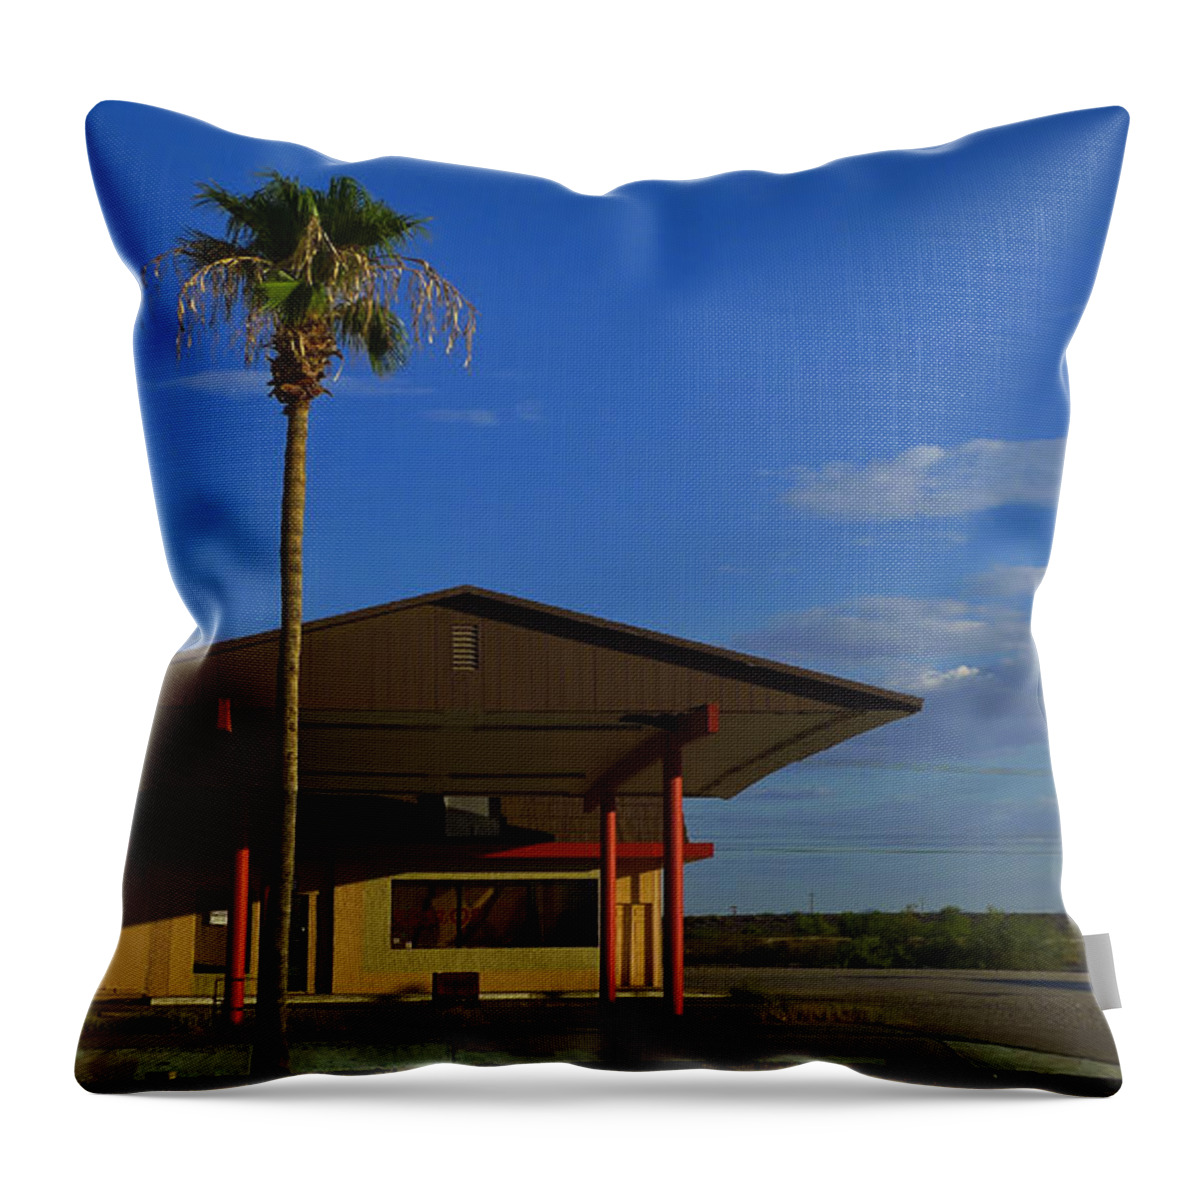 Gila 520208 Throw Pillow featuring the photograph Gila 520208 by Skip Hunt